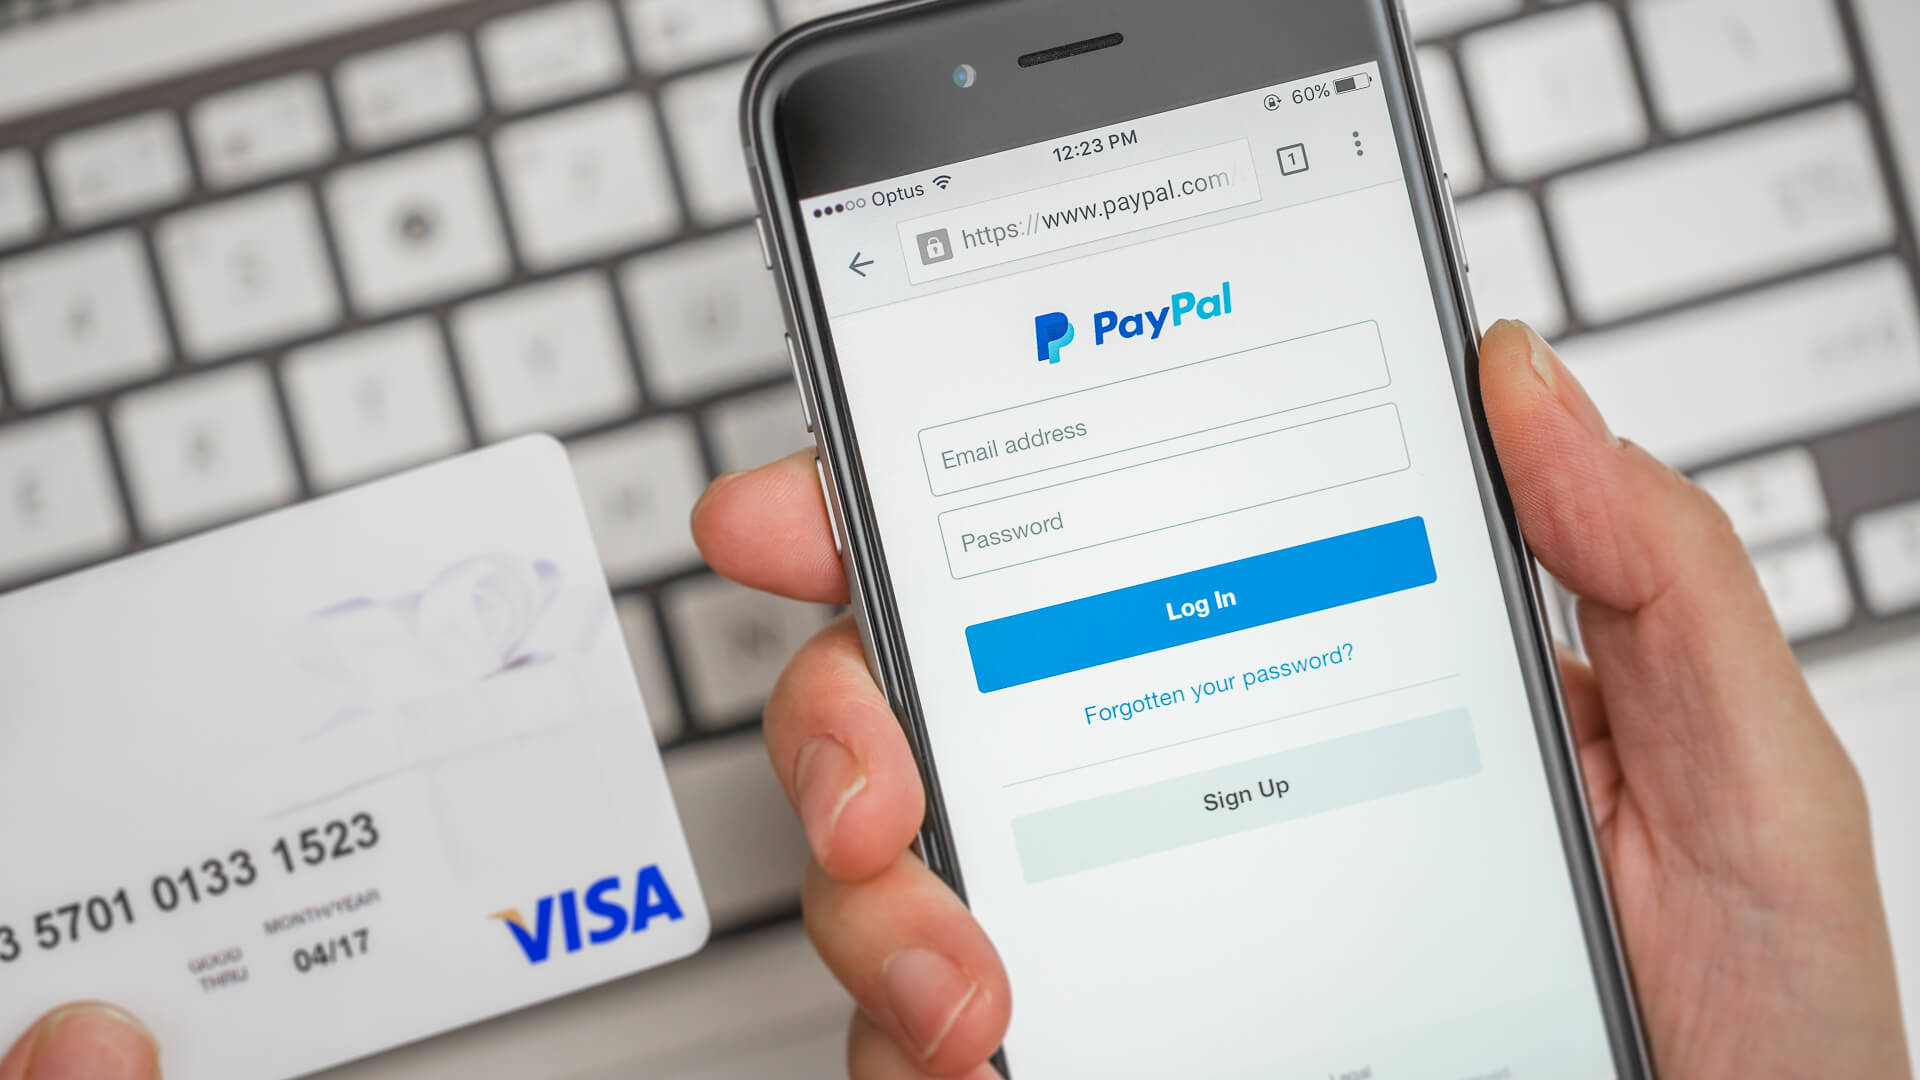 How Do I Transfer Money From My Vanilla Gift Card To My PayPal Account?